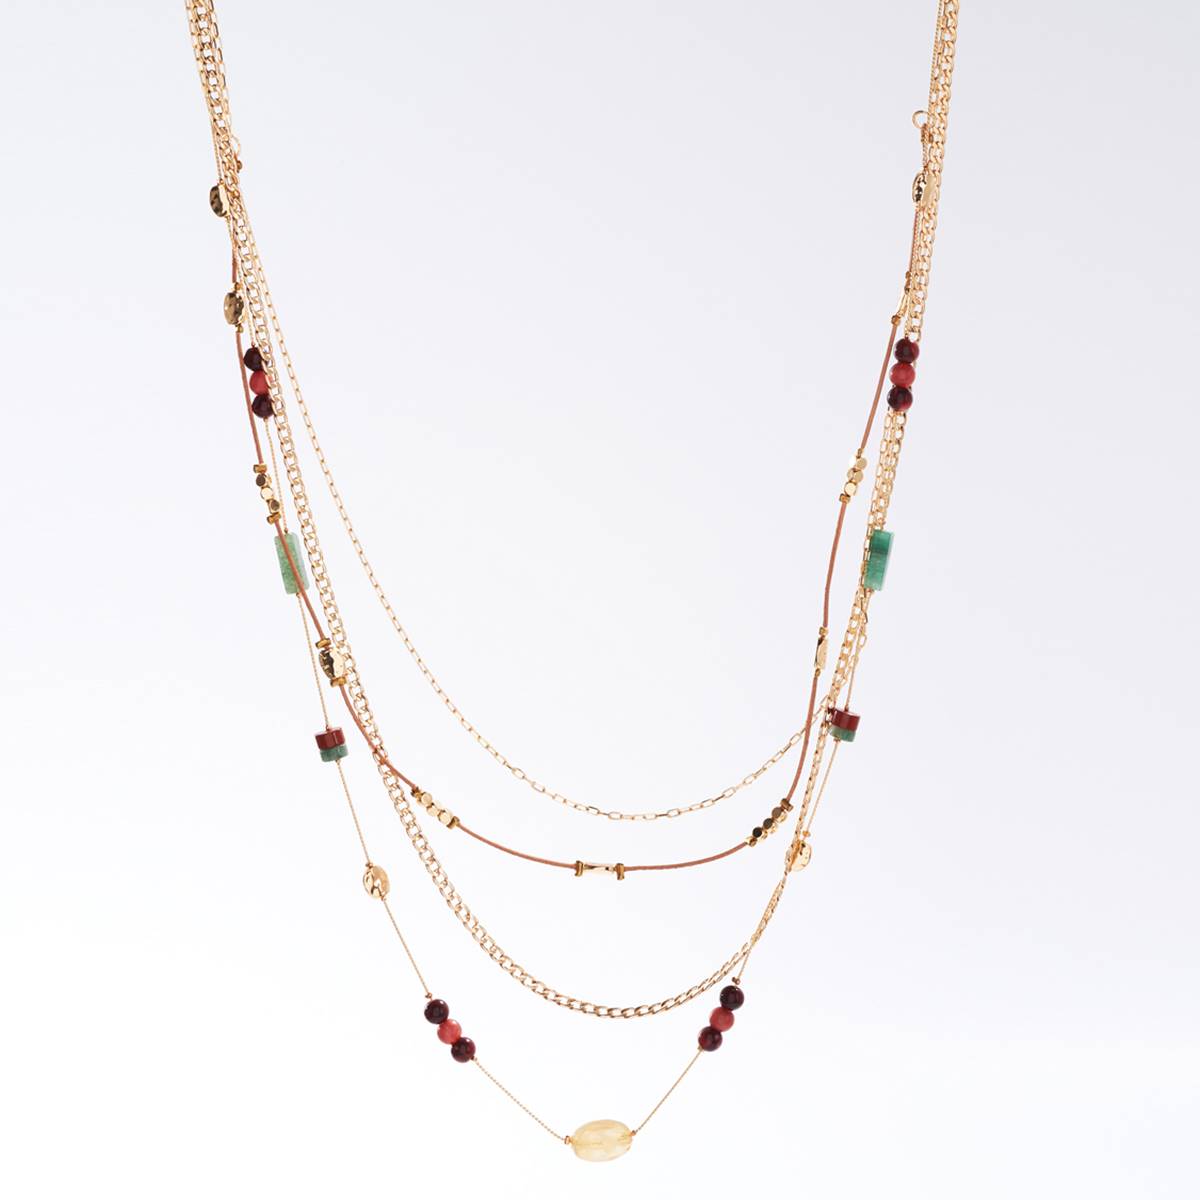 Ashley Cooper(tm) 4 Layer Beaded Necklace